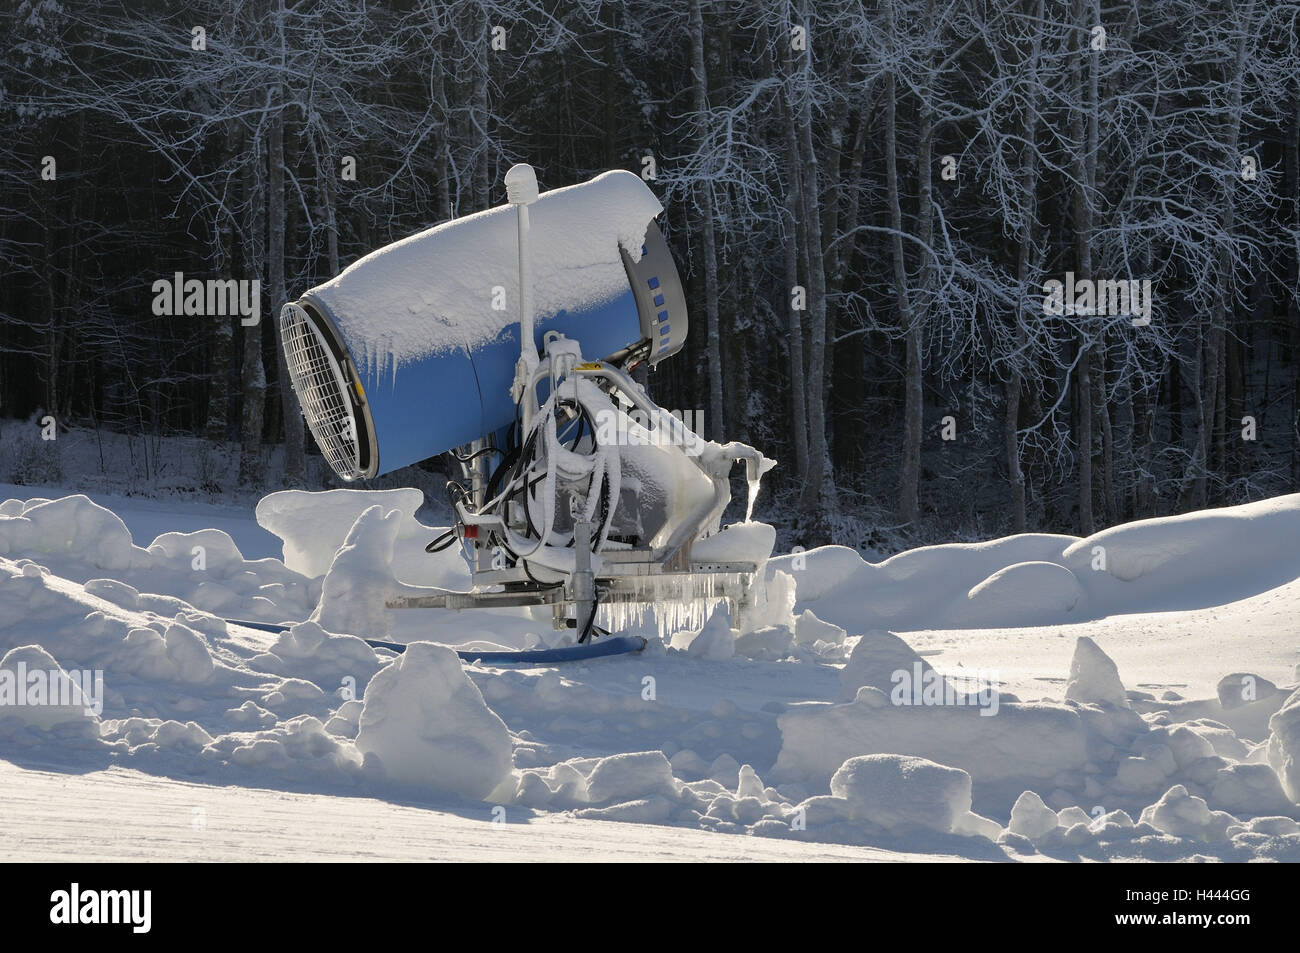 Snow cannon, blue, freezes over, snowy, snow, wood, winter, Stock Photo